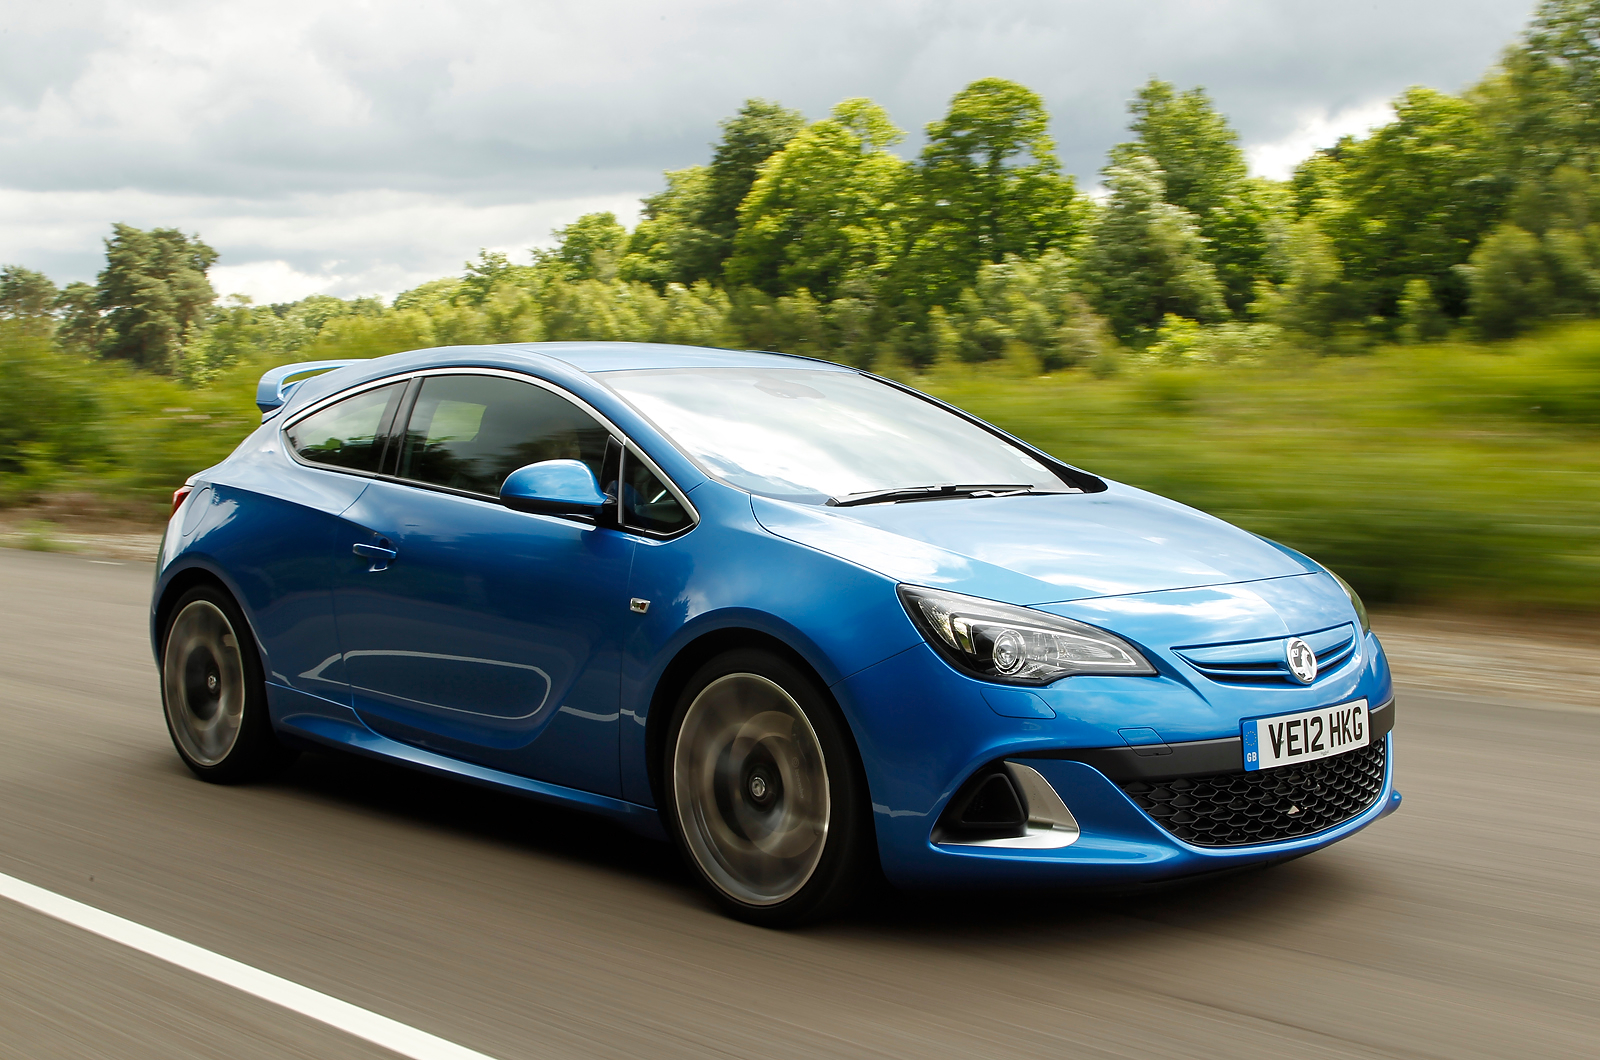 Used Vauxhall Astra GTC VXR 2012-2015 review